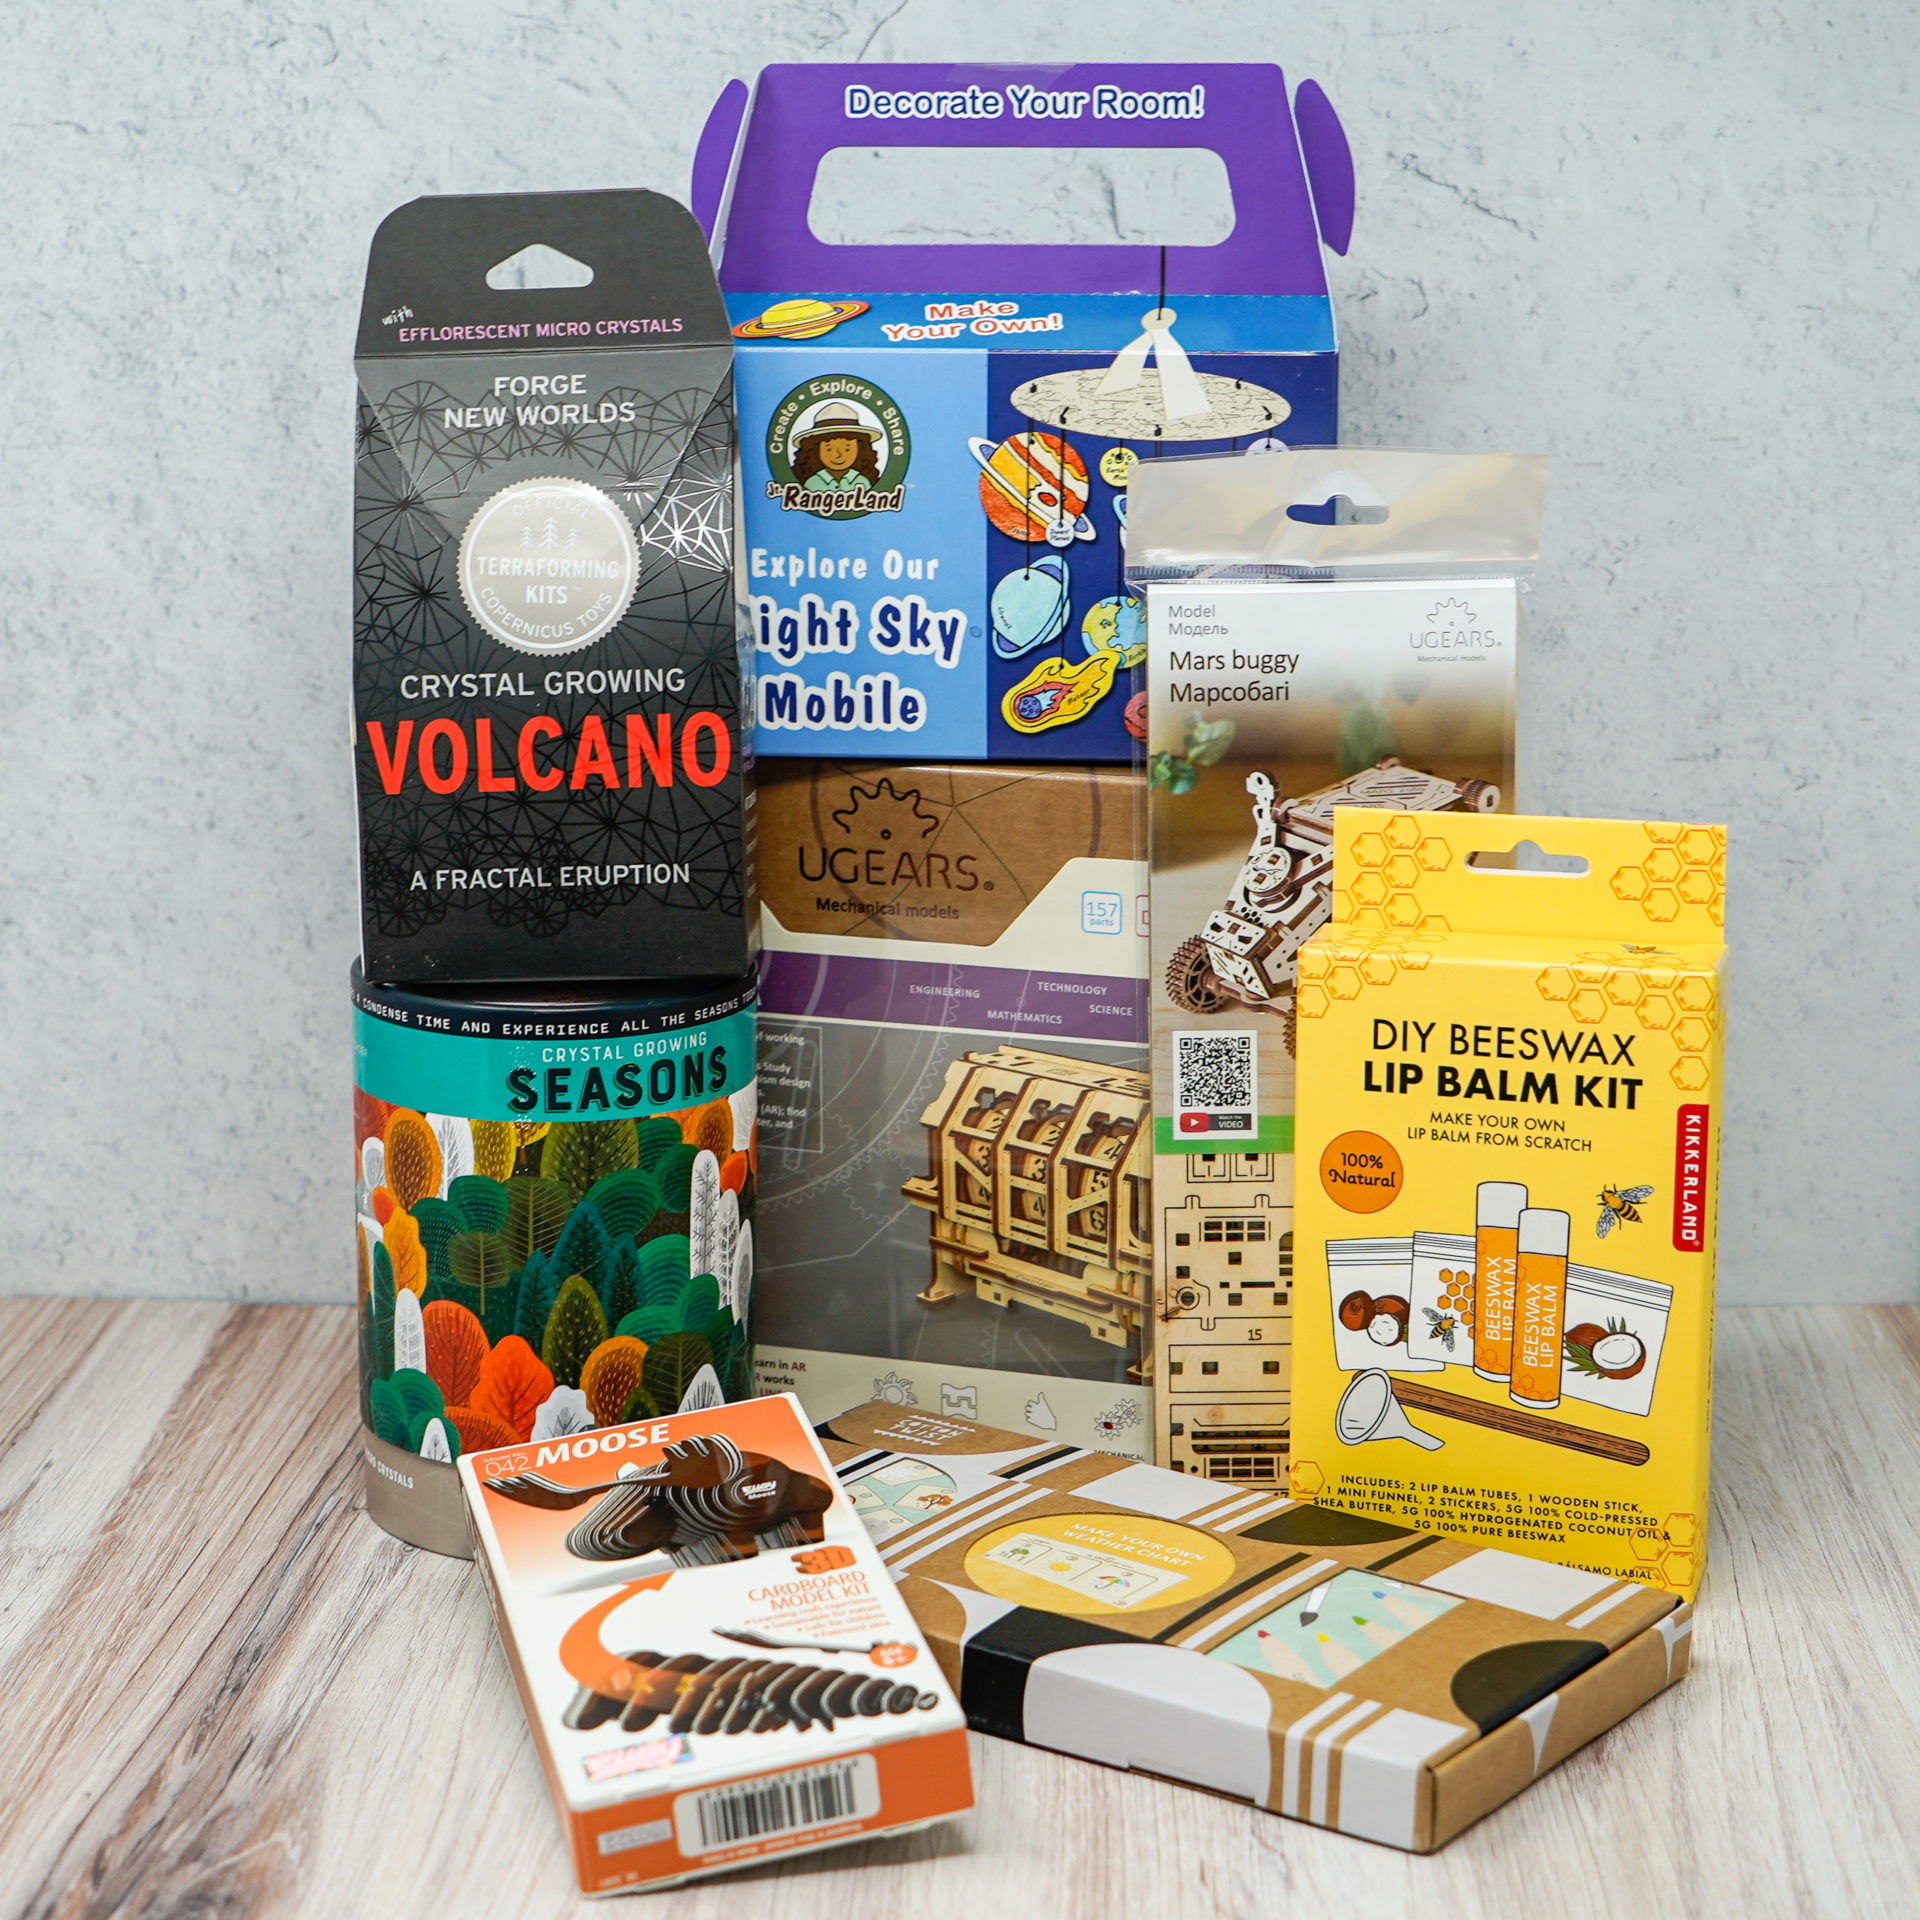 An assortment of gifts such as a build your own volcano kit and make your own lip balm kit